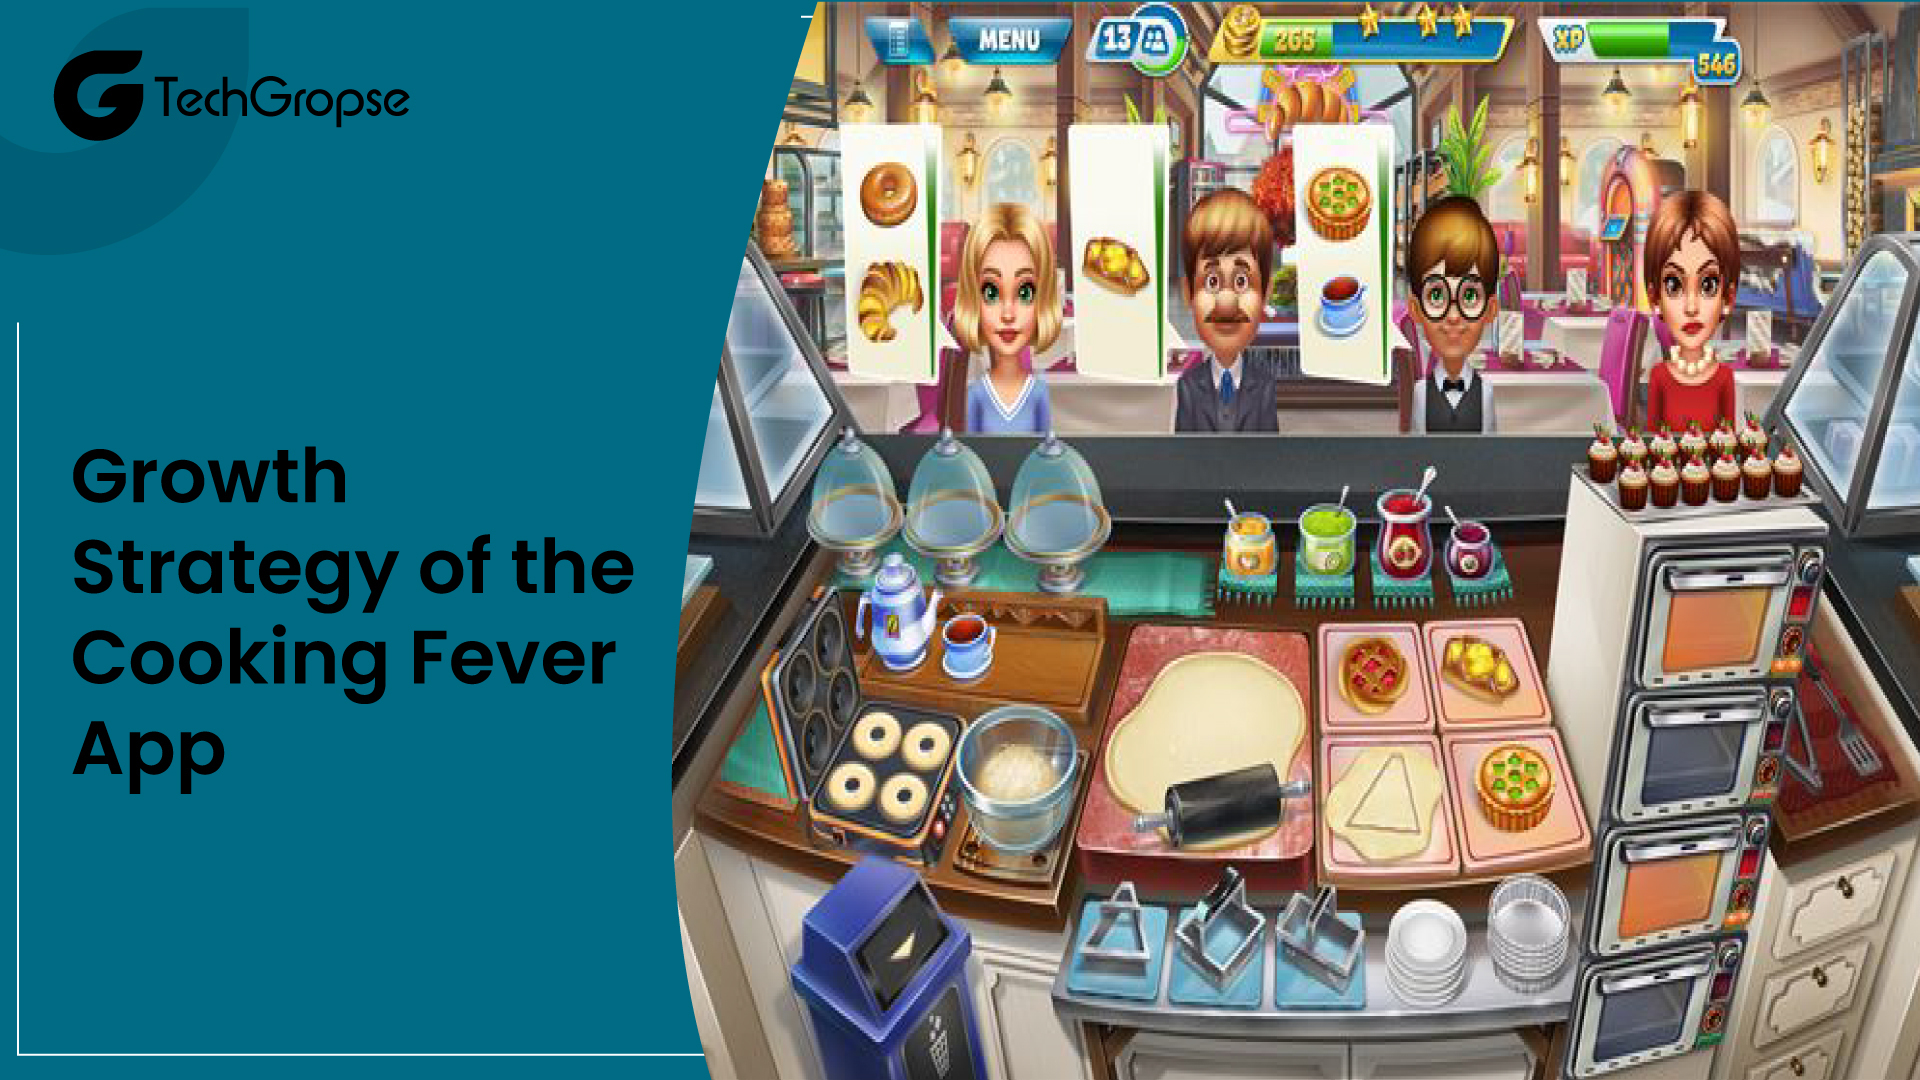 Growth Strategy of the Cooking Fever App